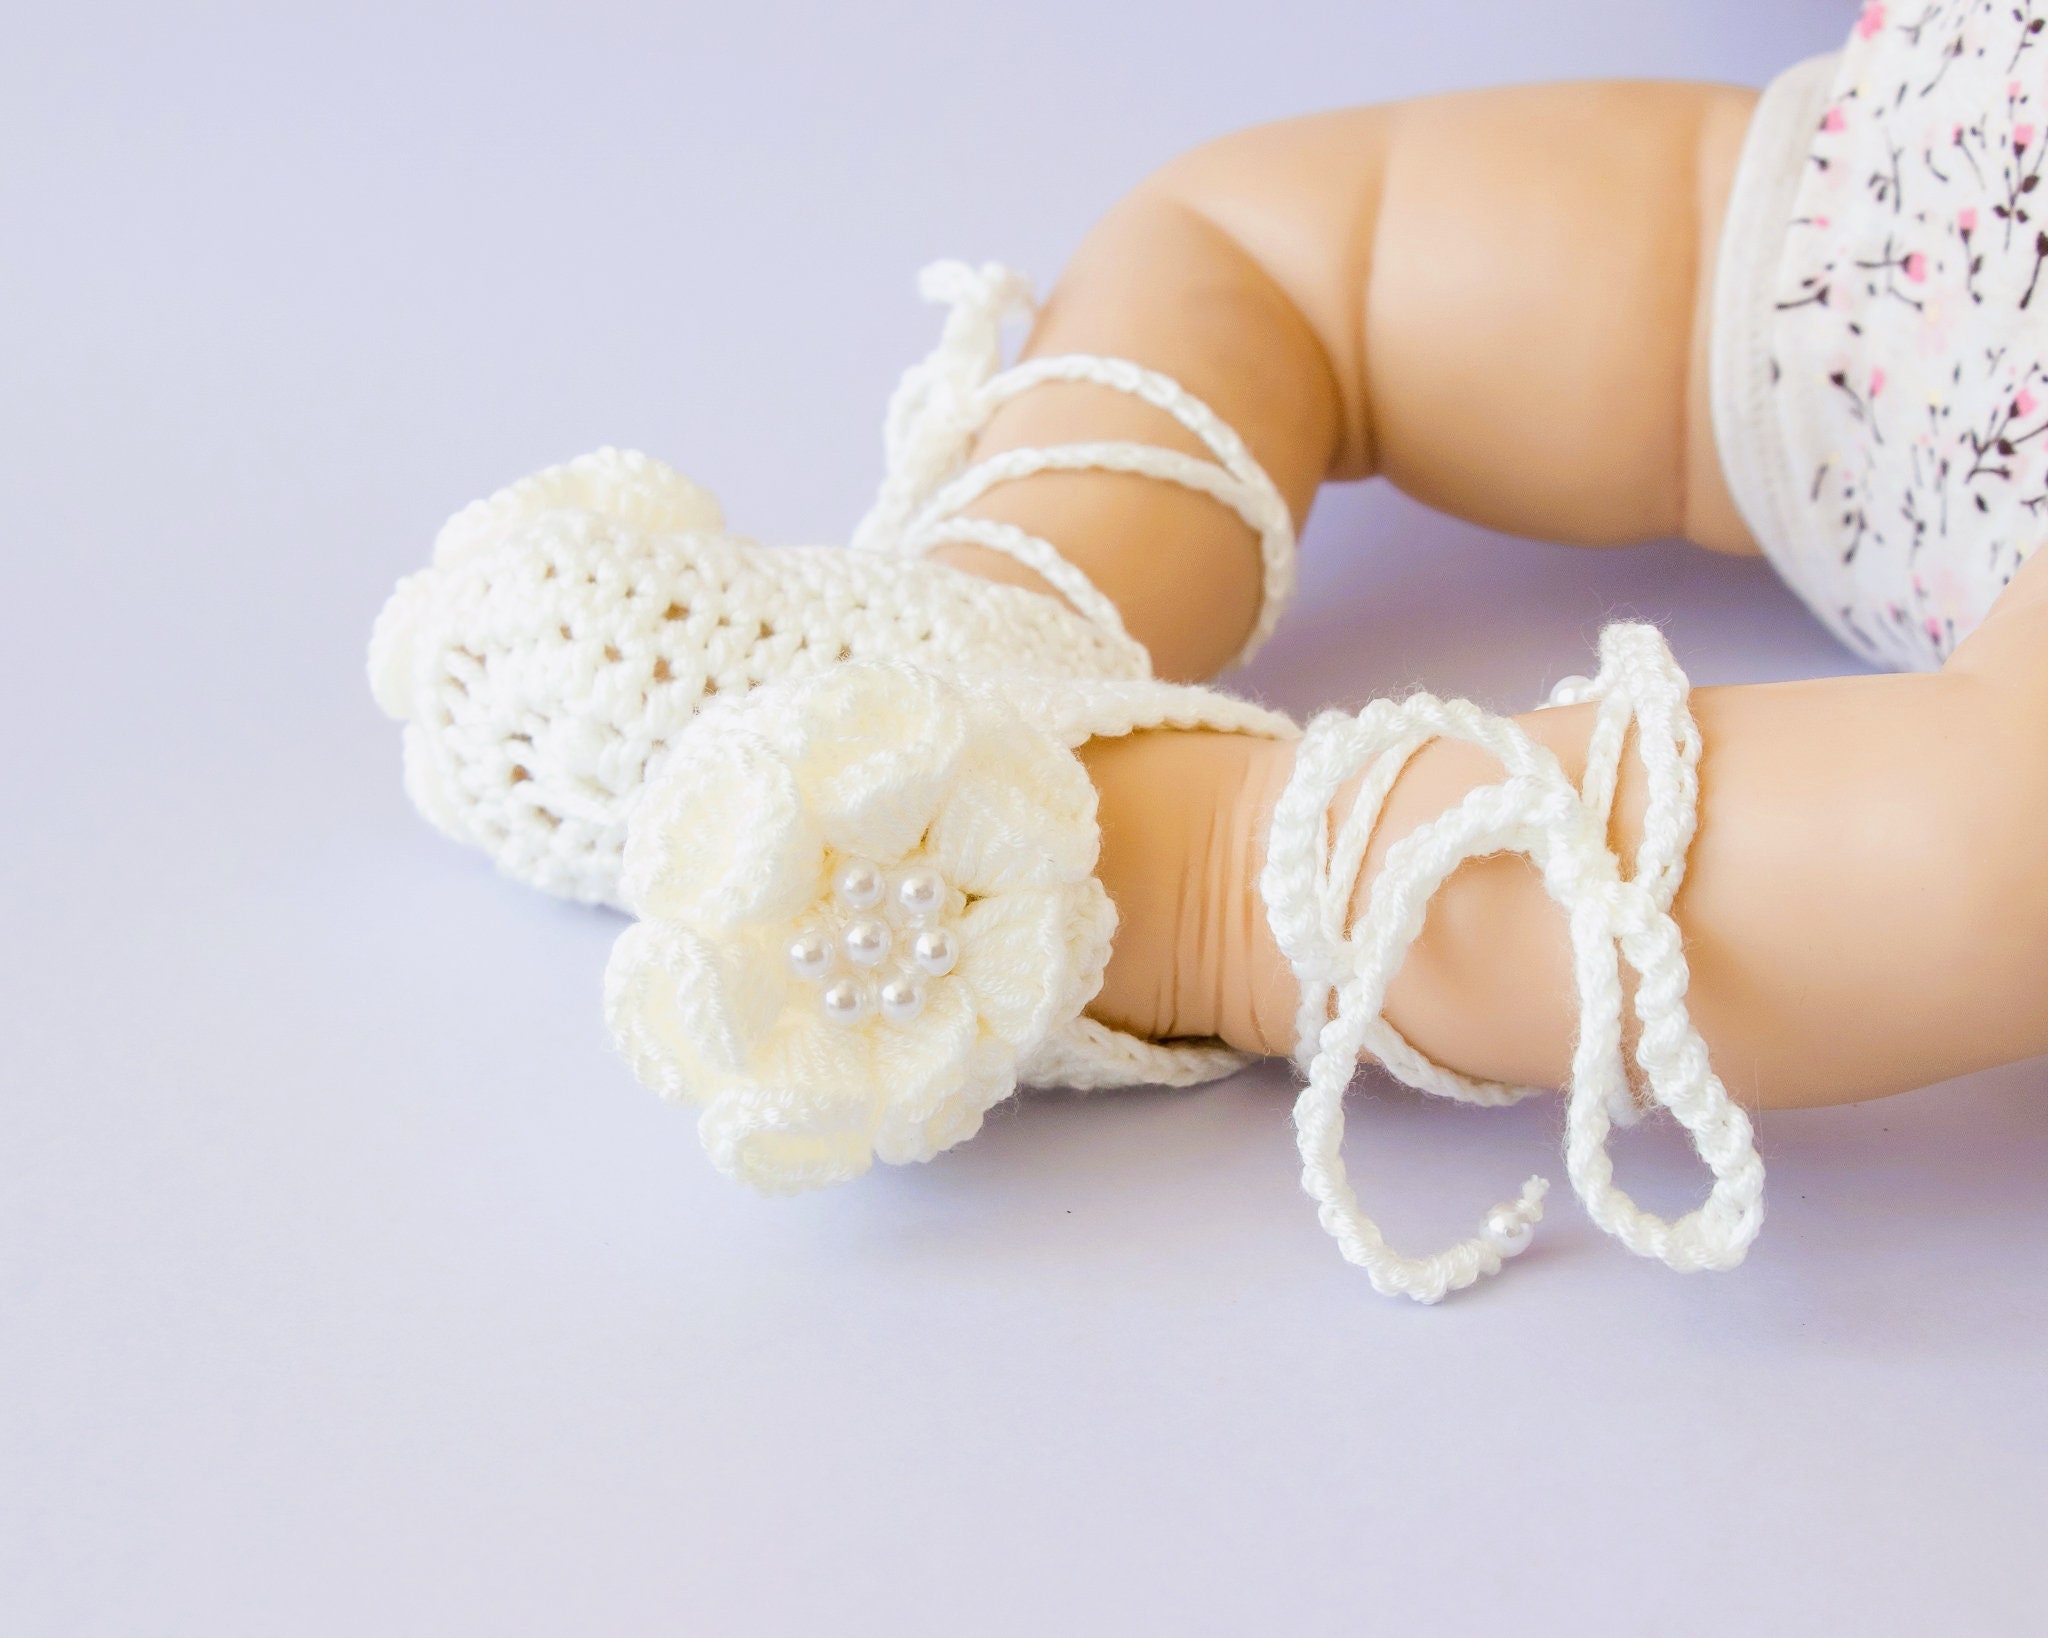 Nationwide Regarding a creditor Ivory white baby girl shoes and headband set, Baptism shoes and headband,  Baby girl gift, Flower shoes, Baby ballet shoes, Baby headband